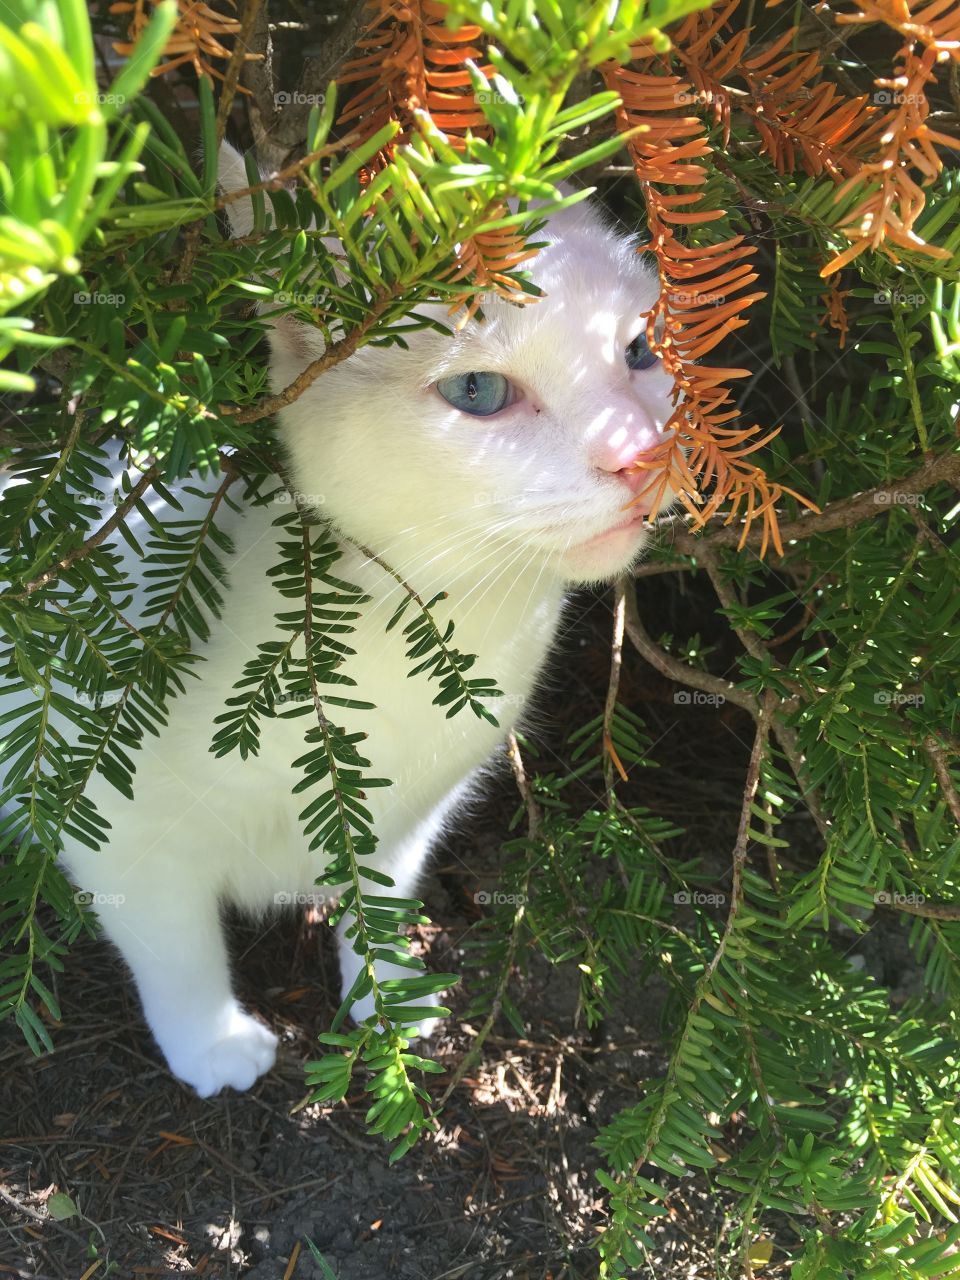 Playing outside in the bushes